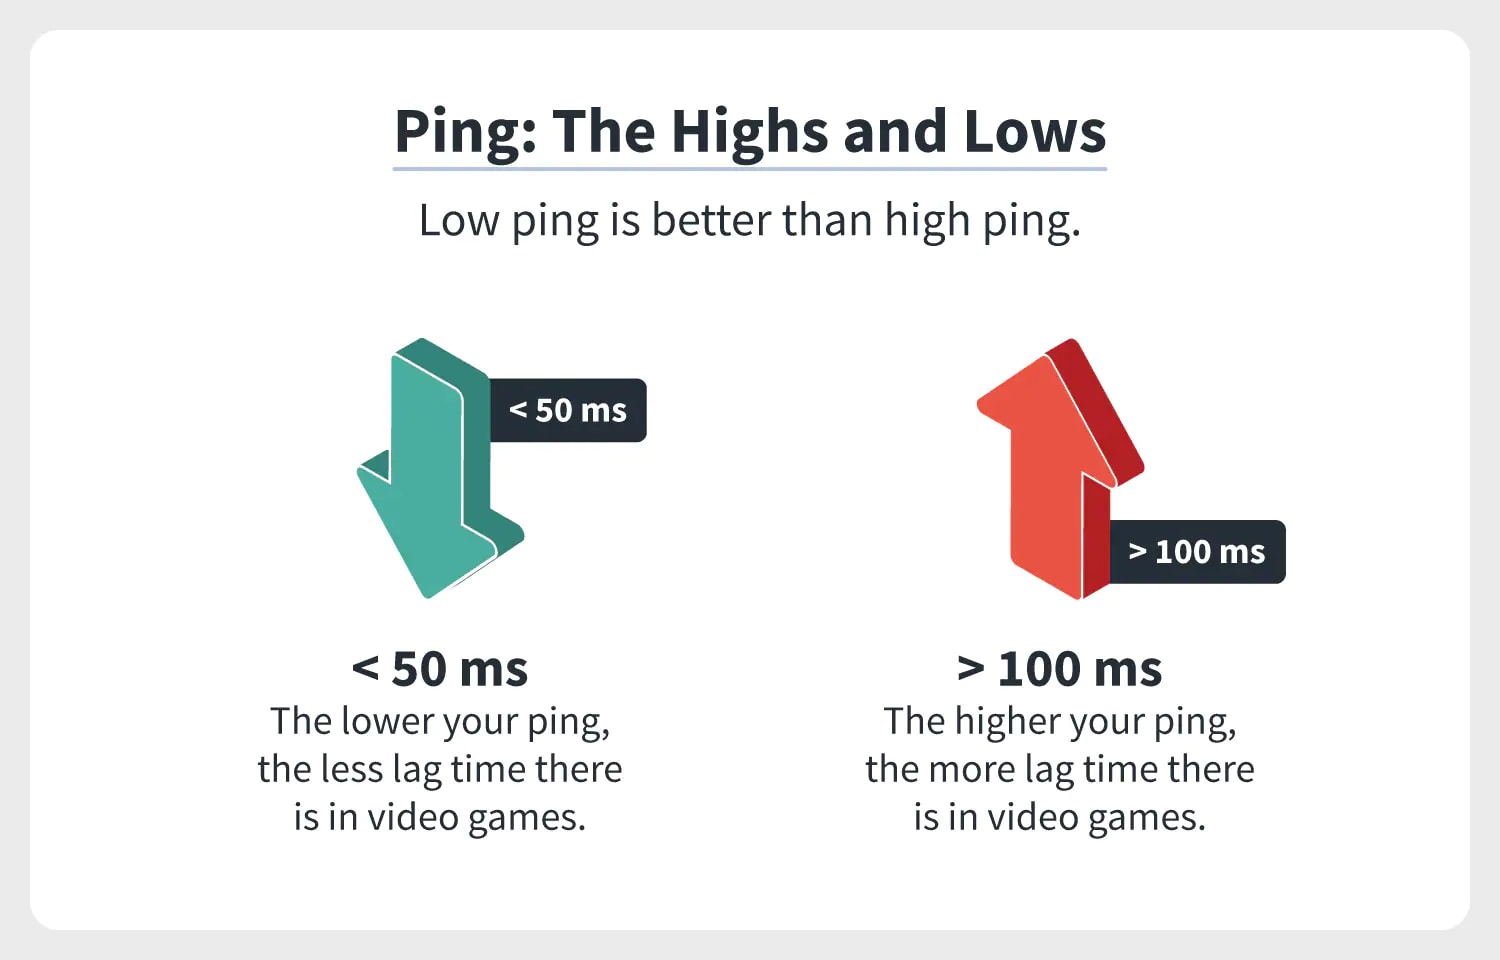 How ping and ultimately reduce lag in video games - Norton